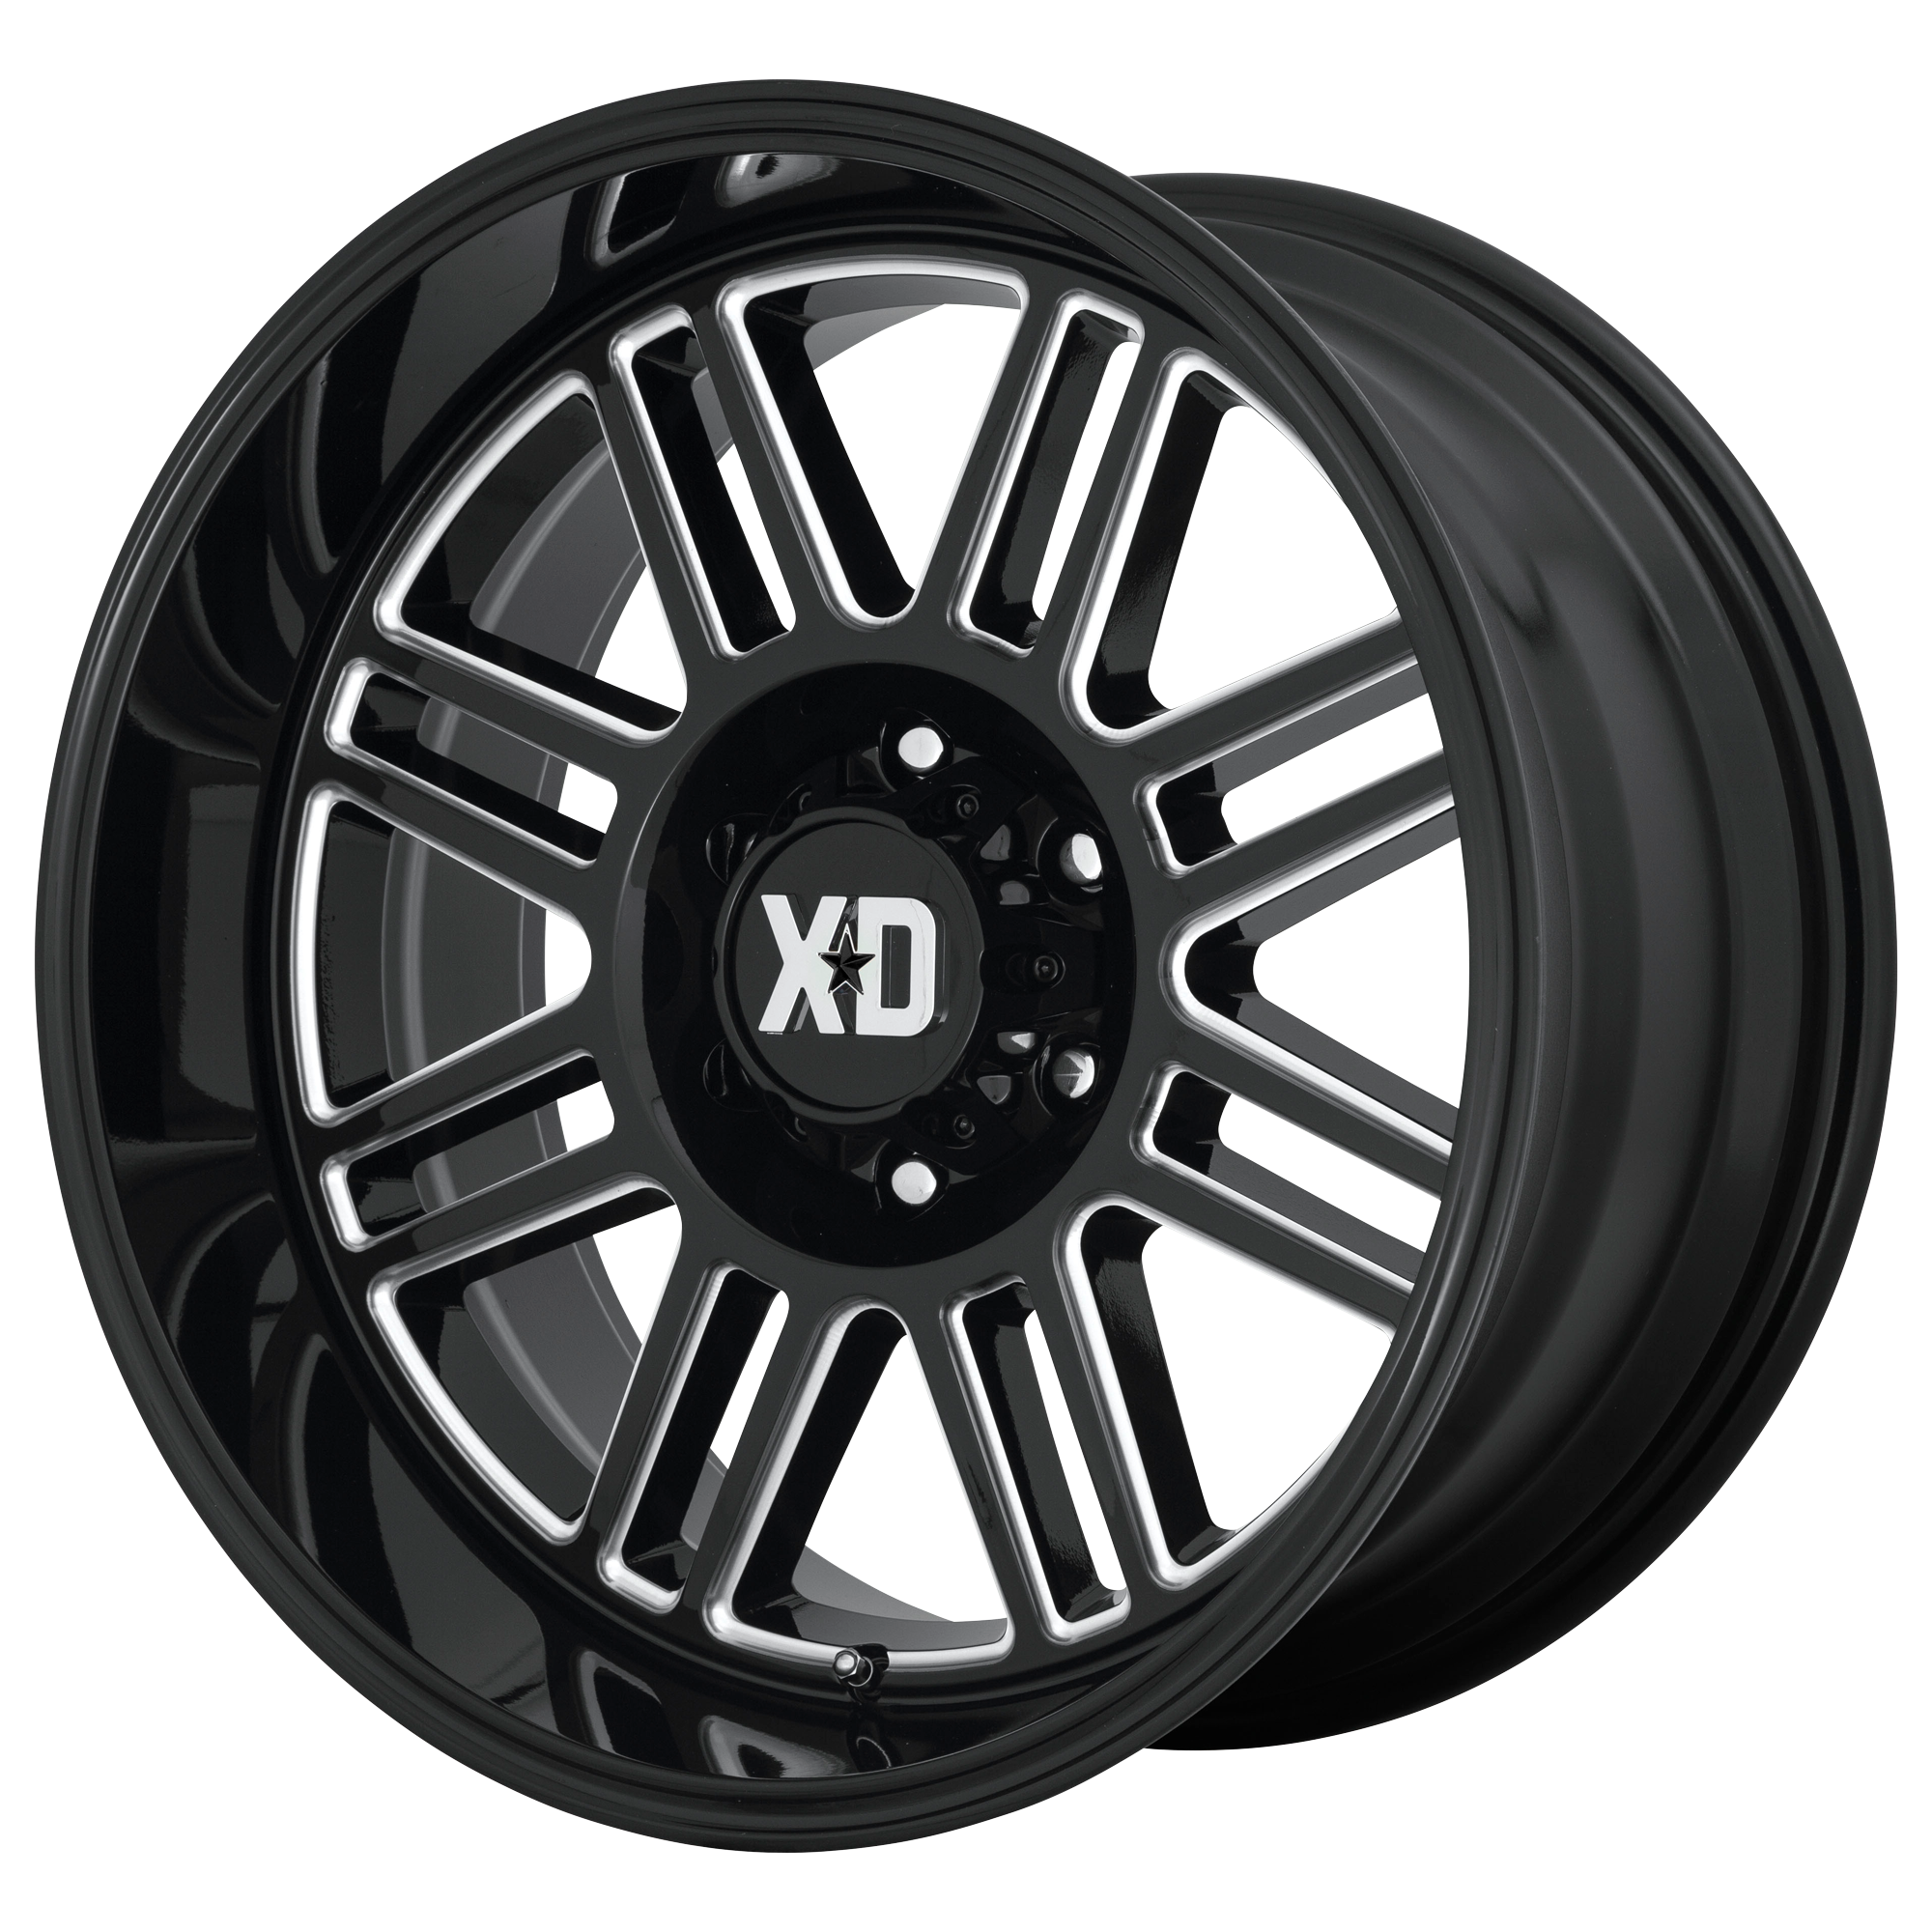 CAGE 20x10 5x127.00 GLOSS BLACK MILLED (-18 mm) - Tires and Engine Performance